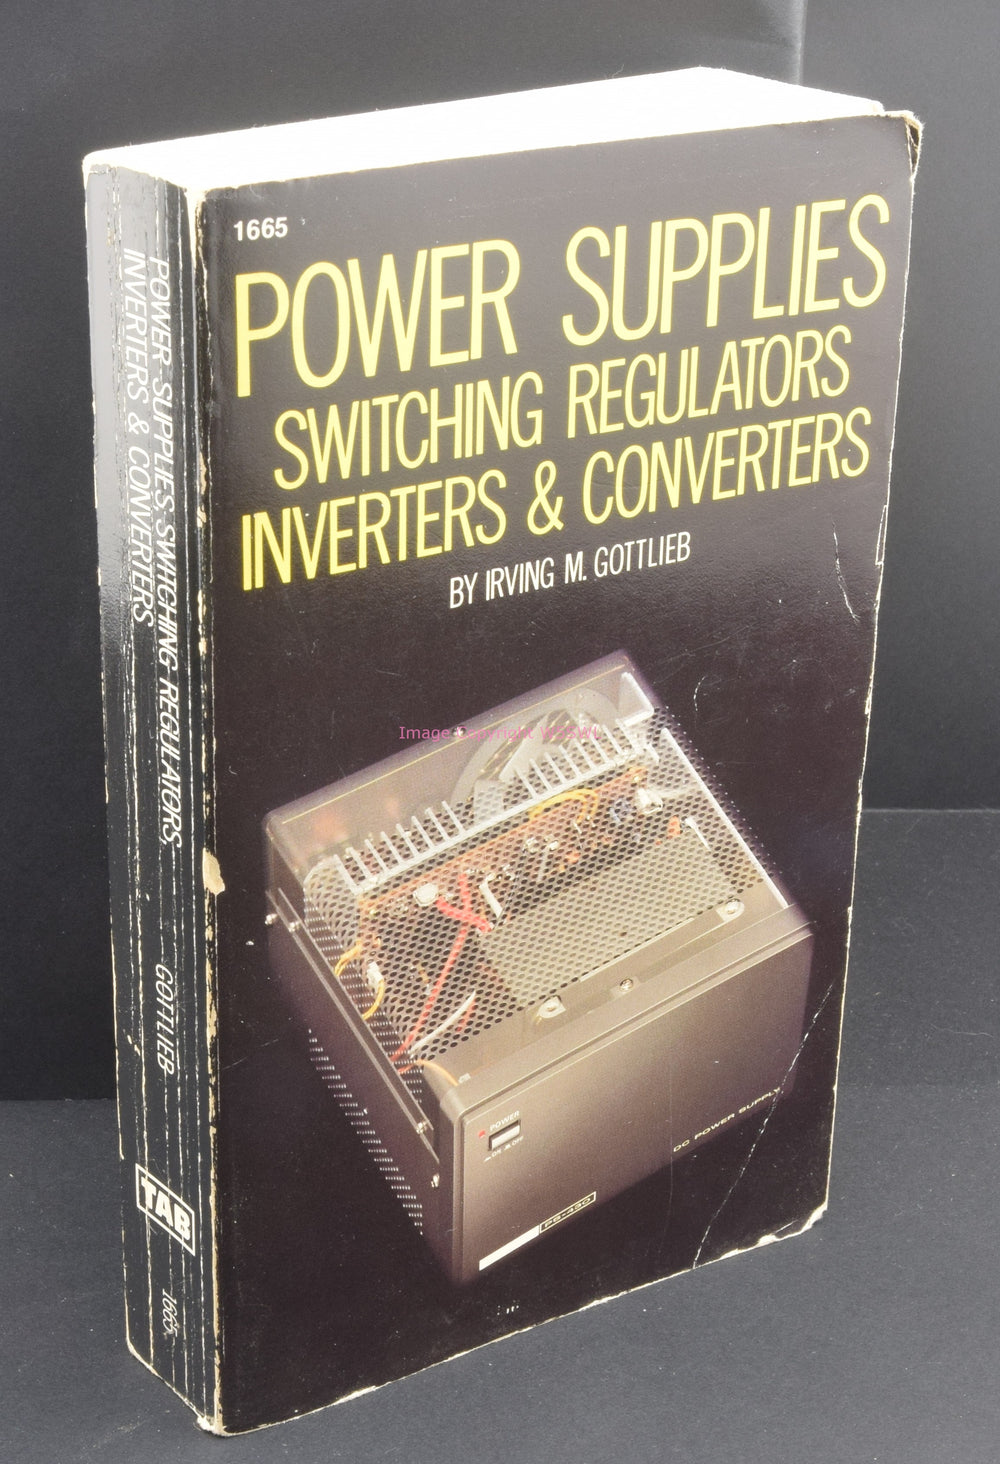 Power Supplies Switching Regulators Inverters Converters by Gottlieb - Dave's Hobby Shop by W5SWL